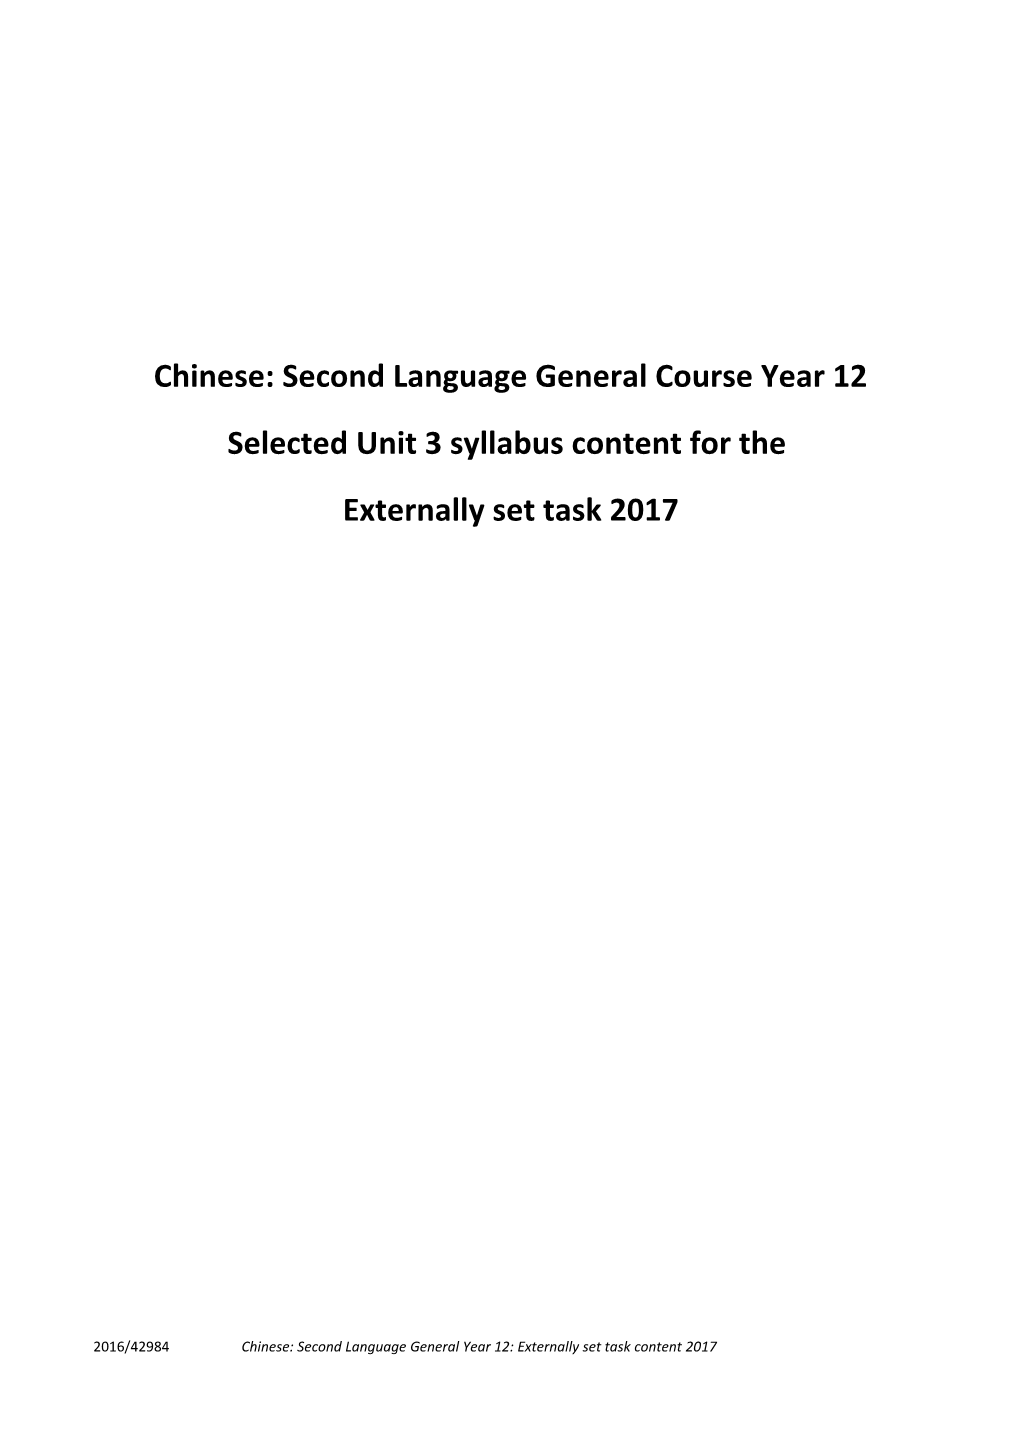 Chinese: Second Language General Course Year 12